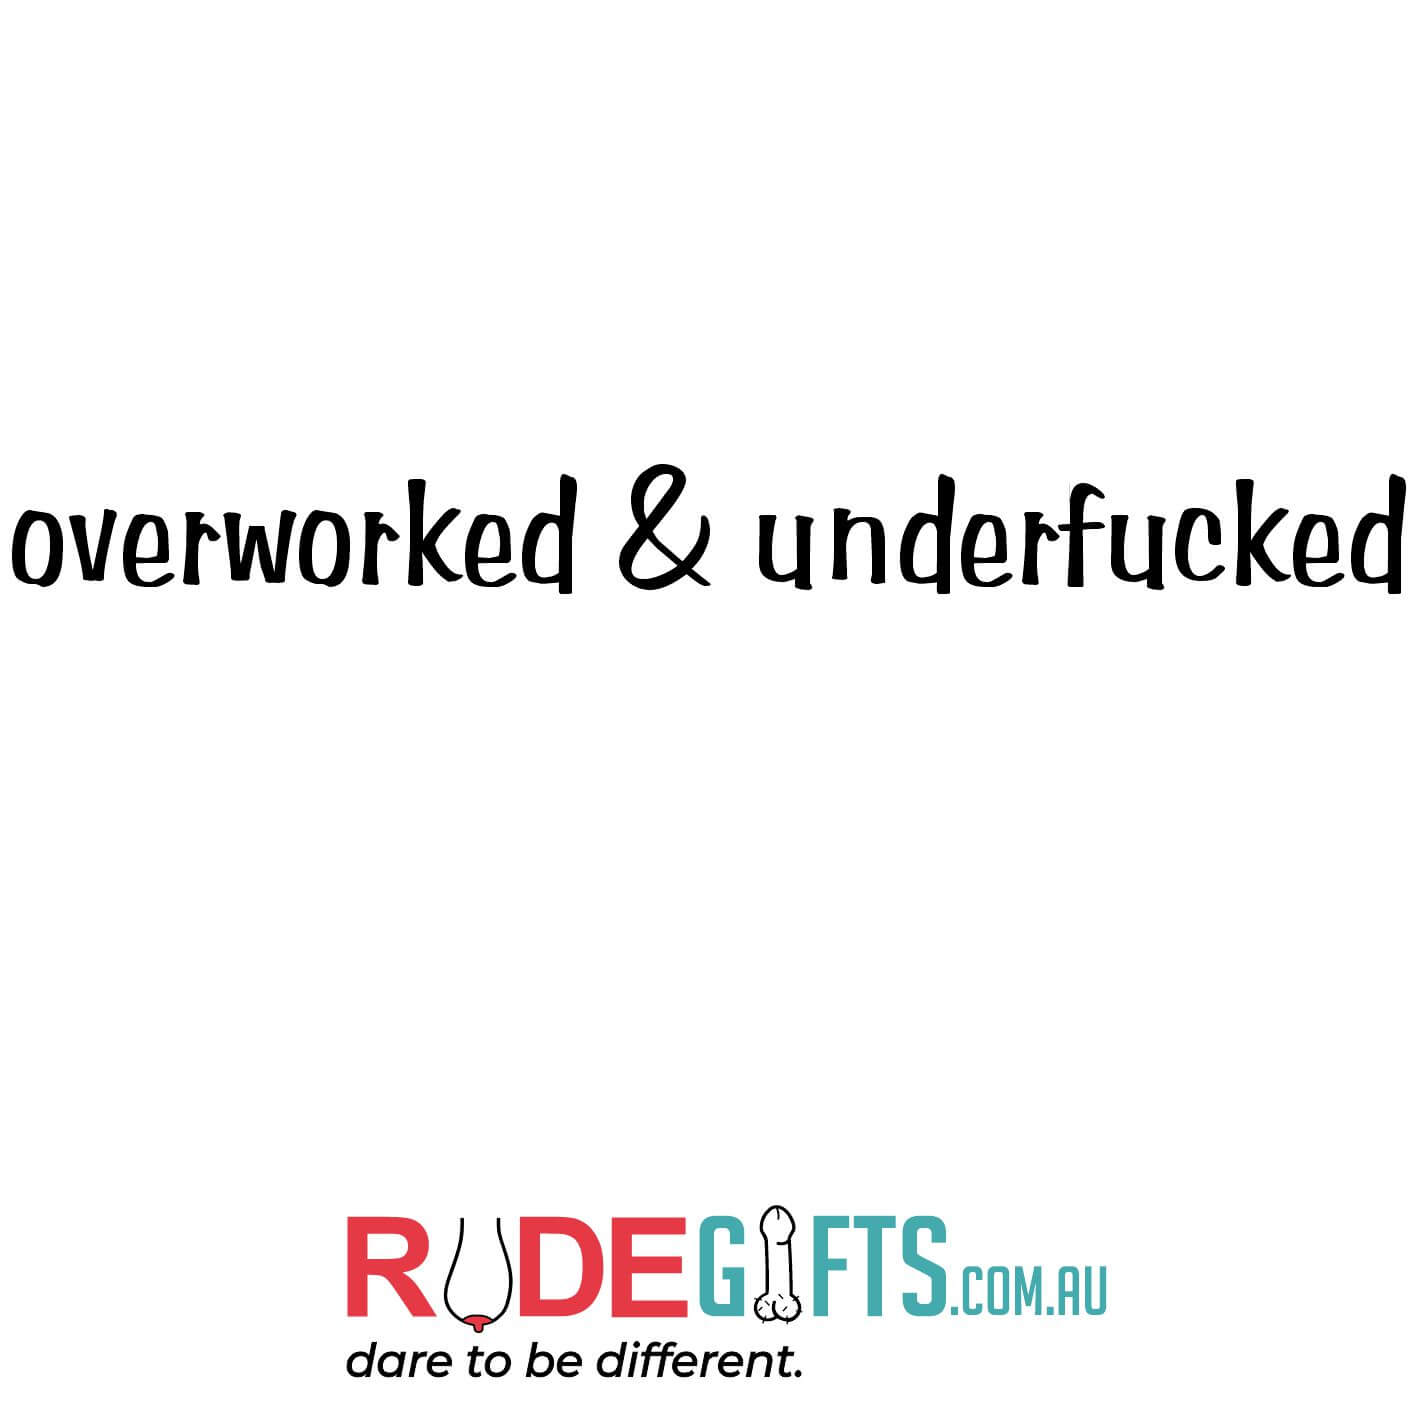 Overworked and underfucked - 0